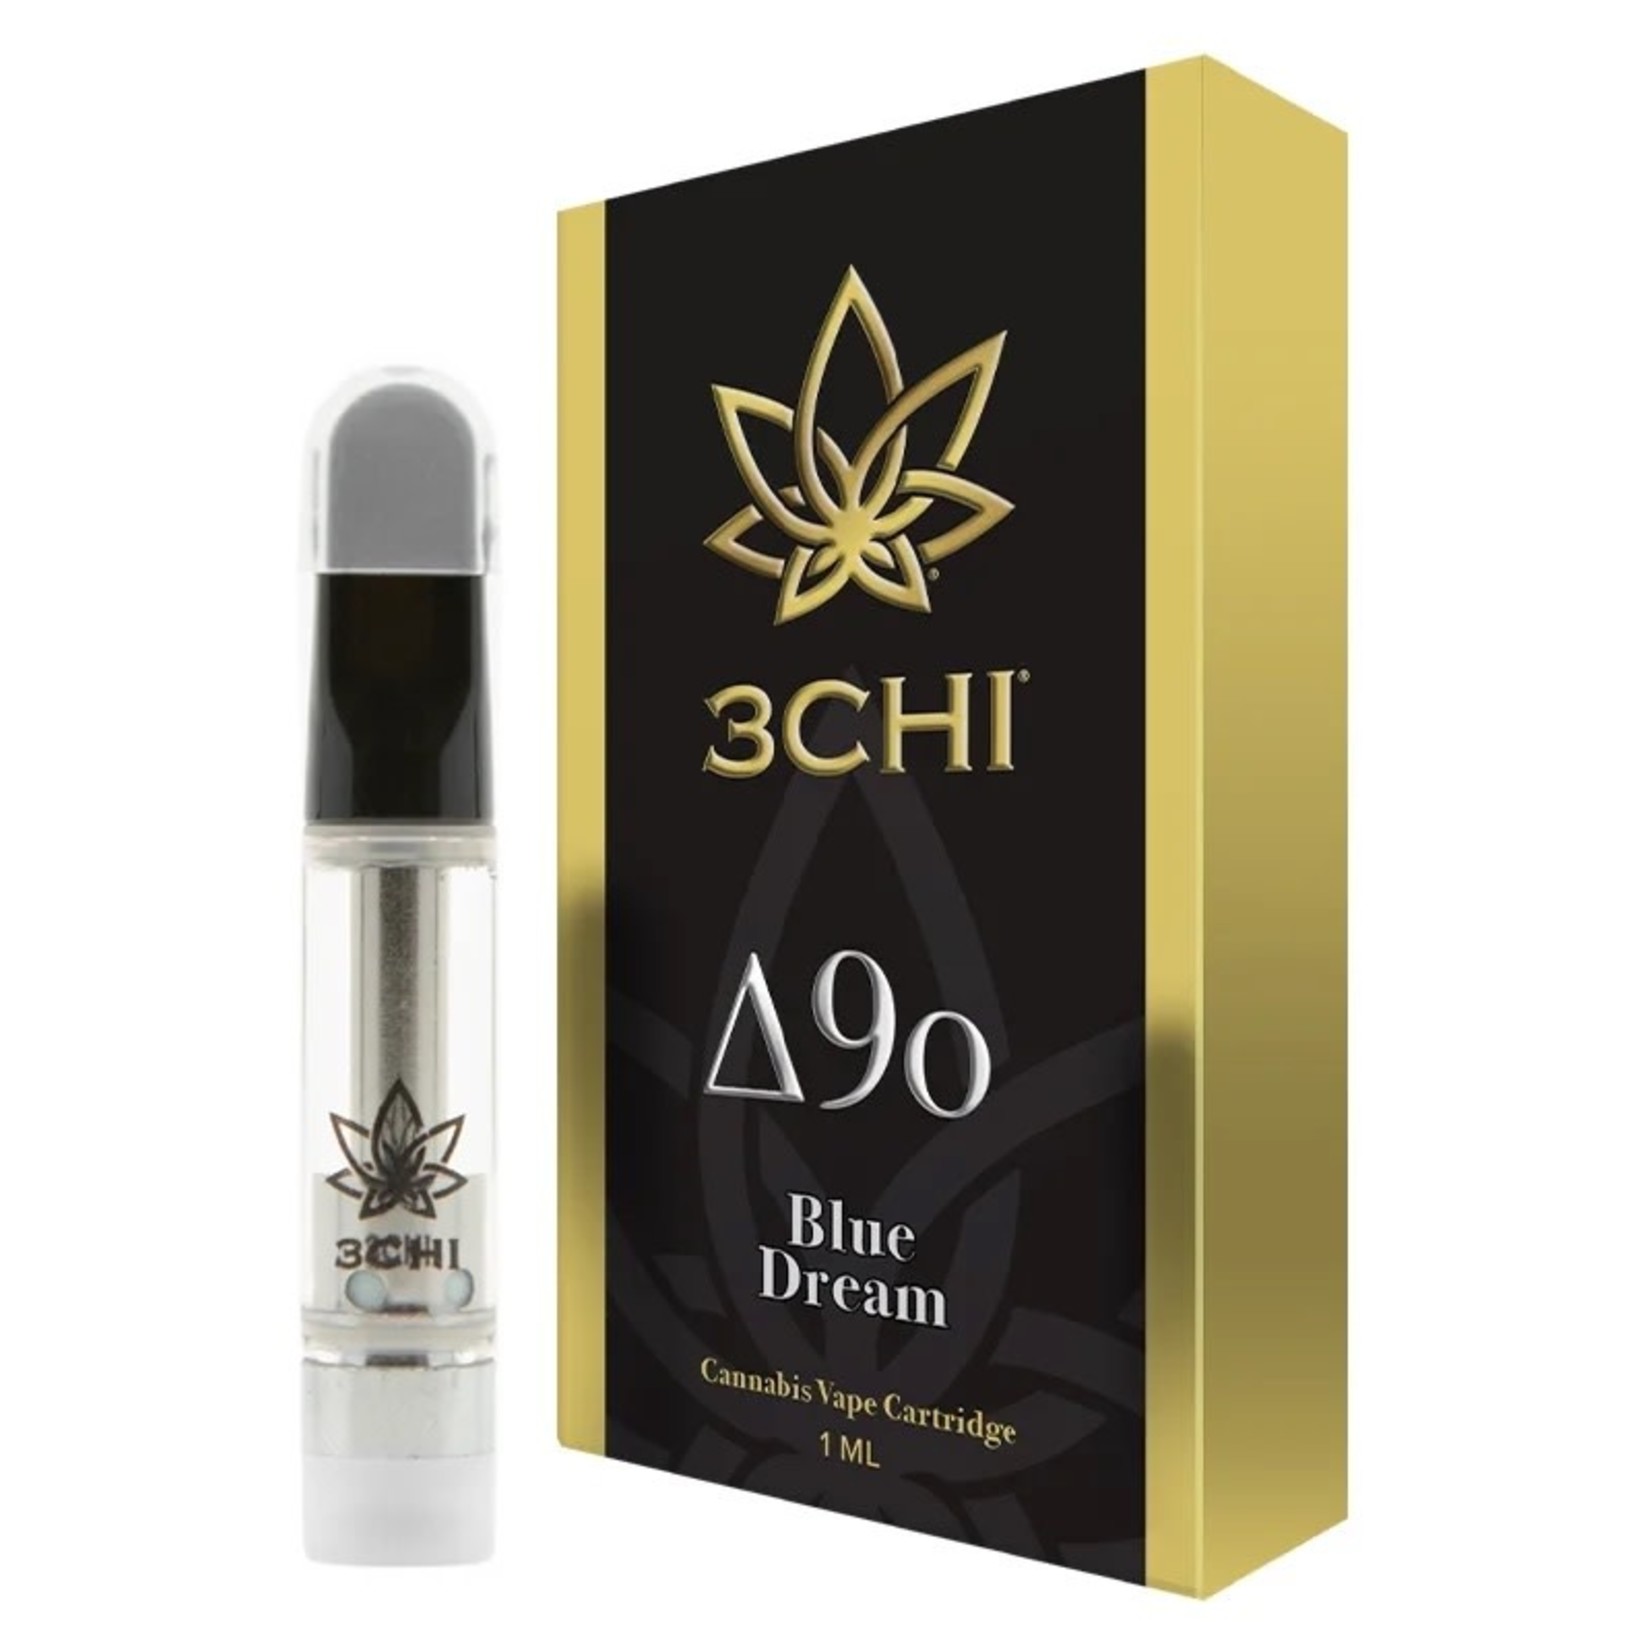 3 CHI Check Local Laws (Not legal in all States) 3 chi Delta 9o Vape Cartridge